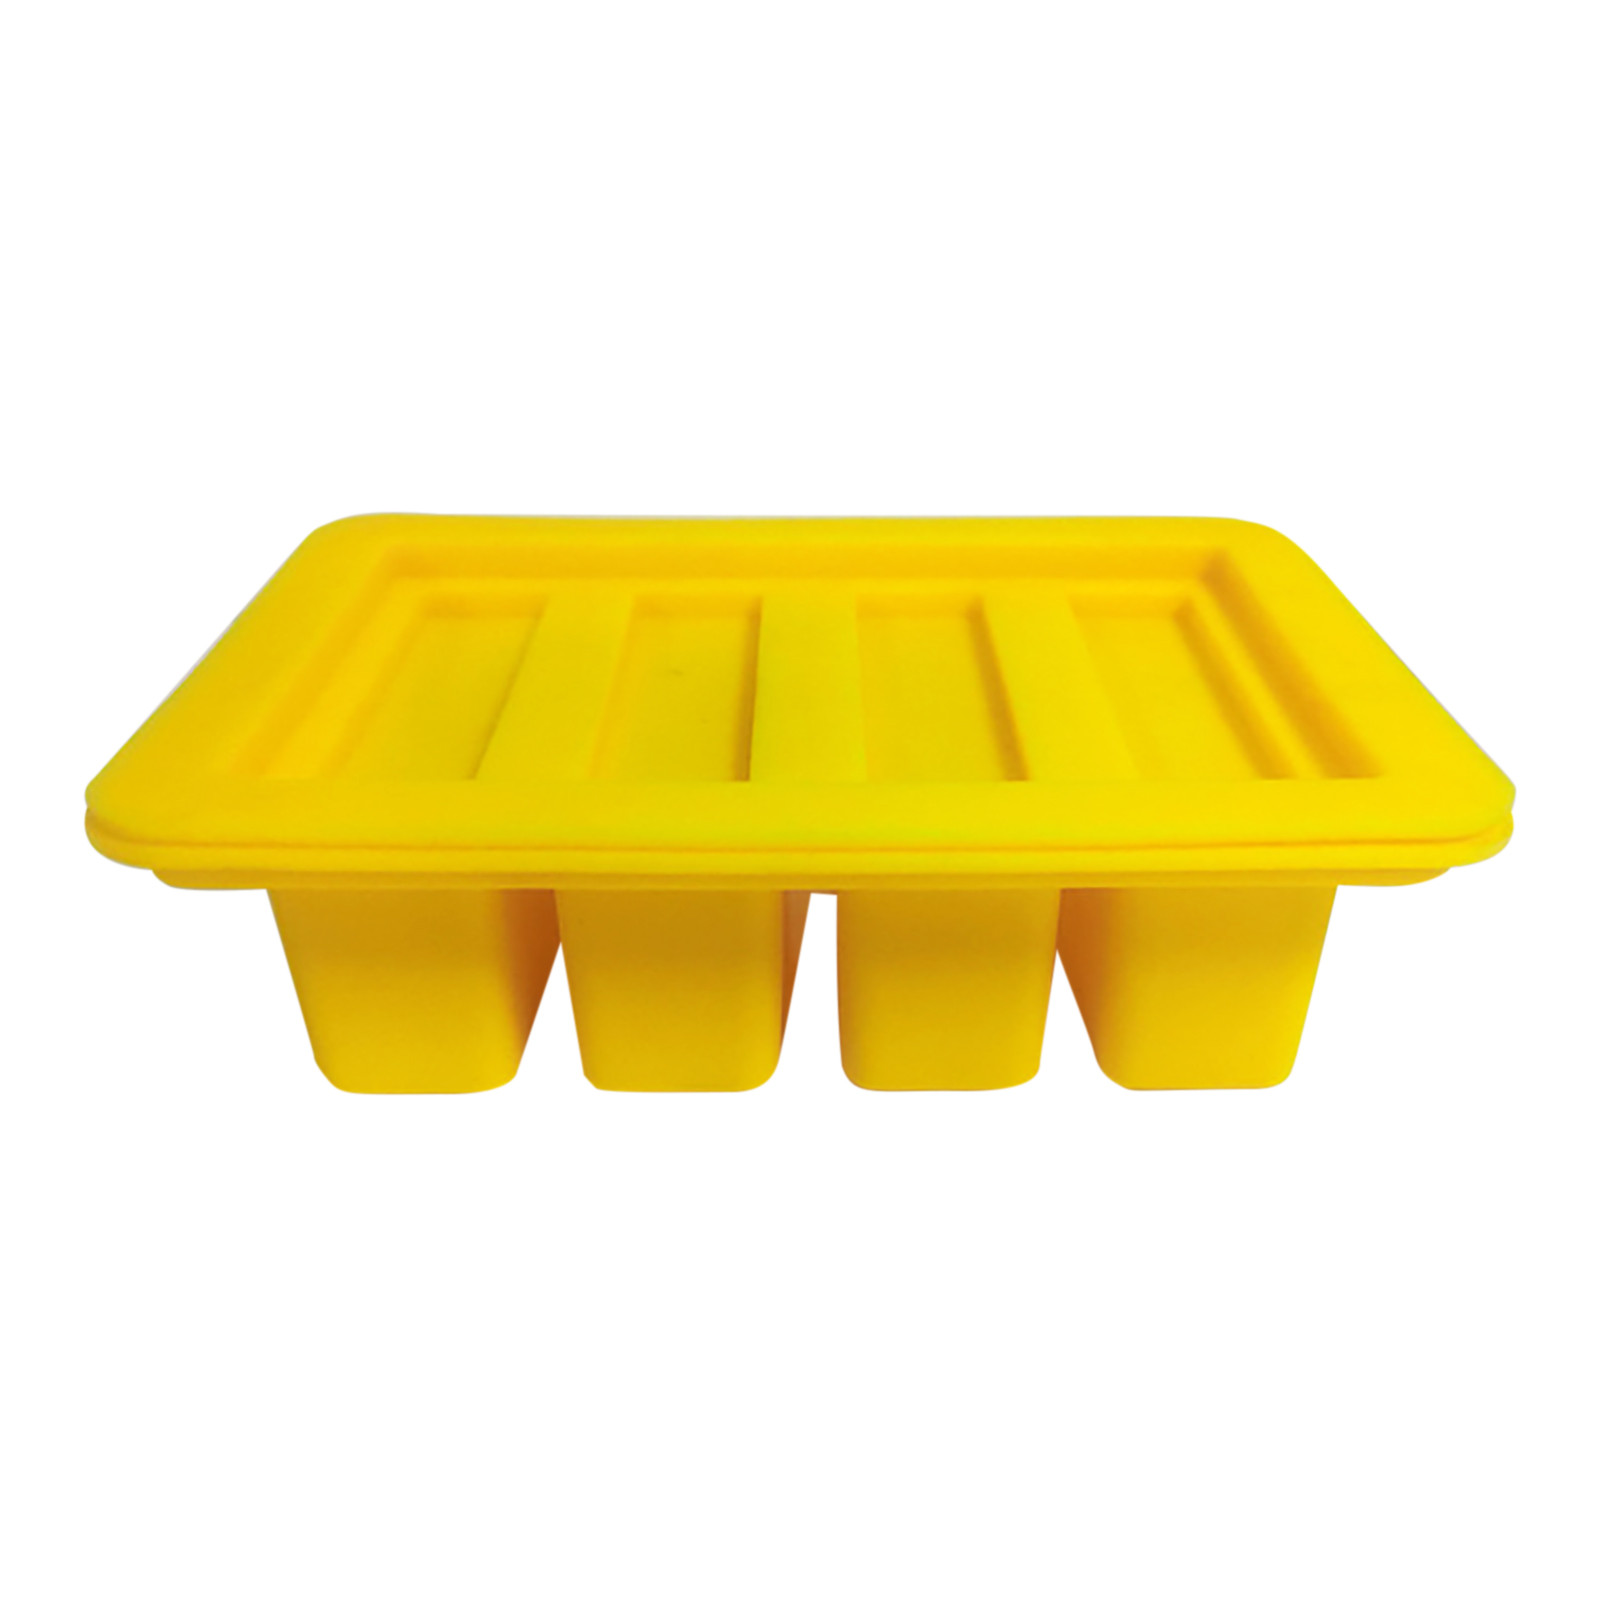 Veki Tray Stick Butter Container Silicone Large With Lid Storage Butter 4  Kitchen，Dining Bar Wax Melts Molds Silicone 